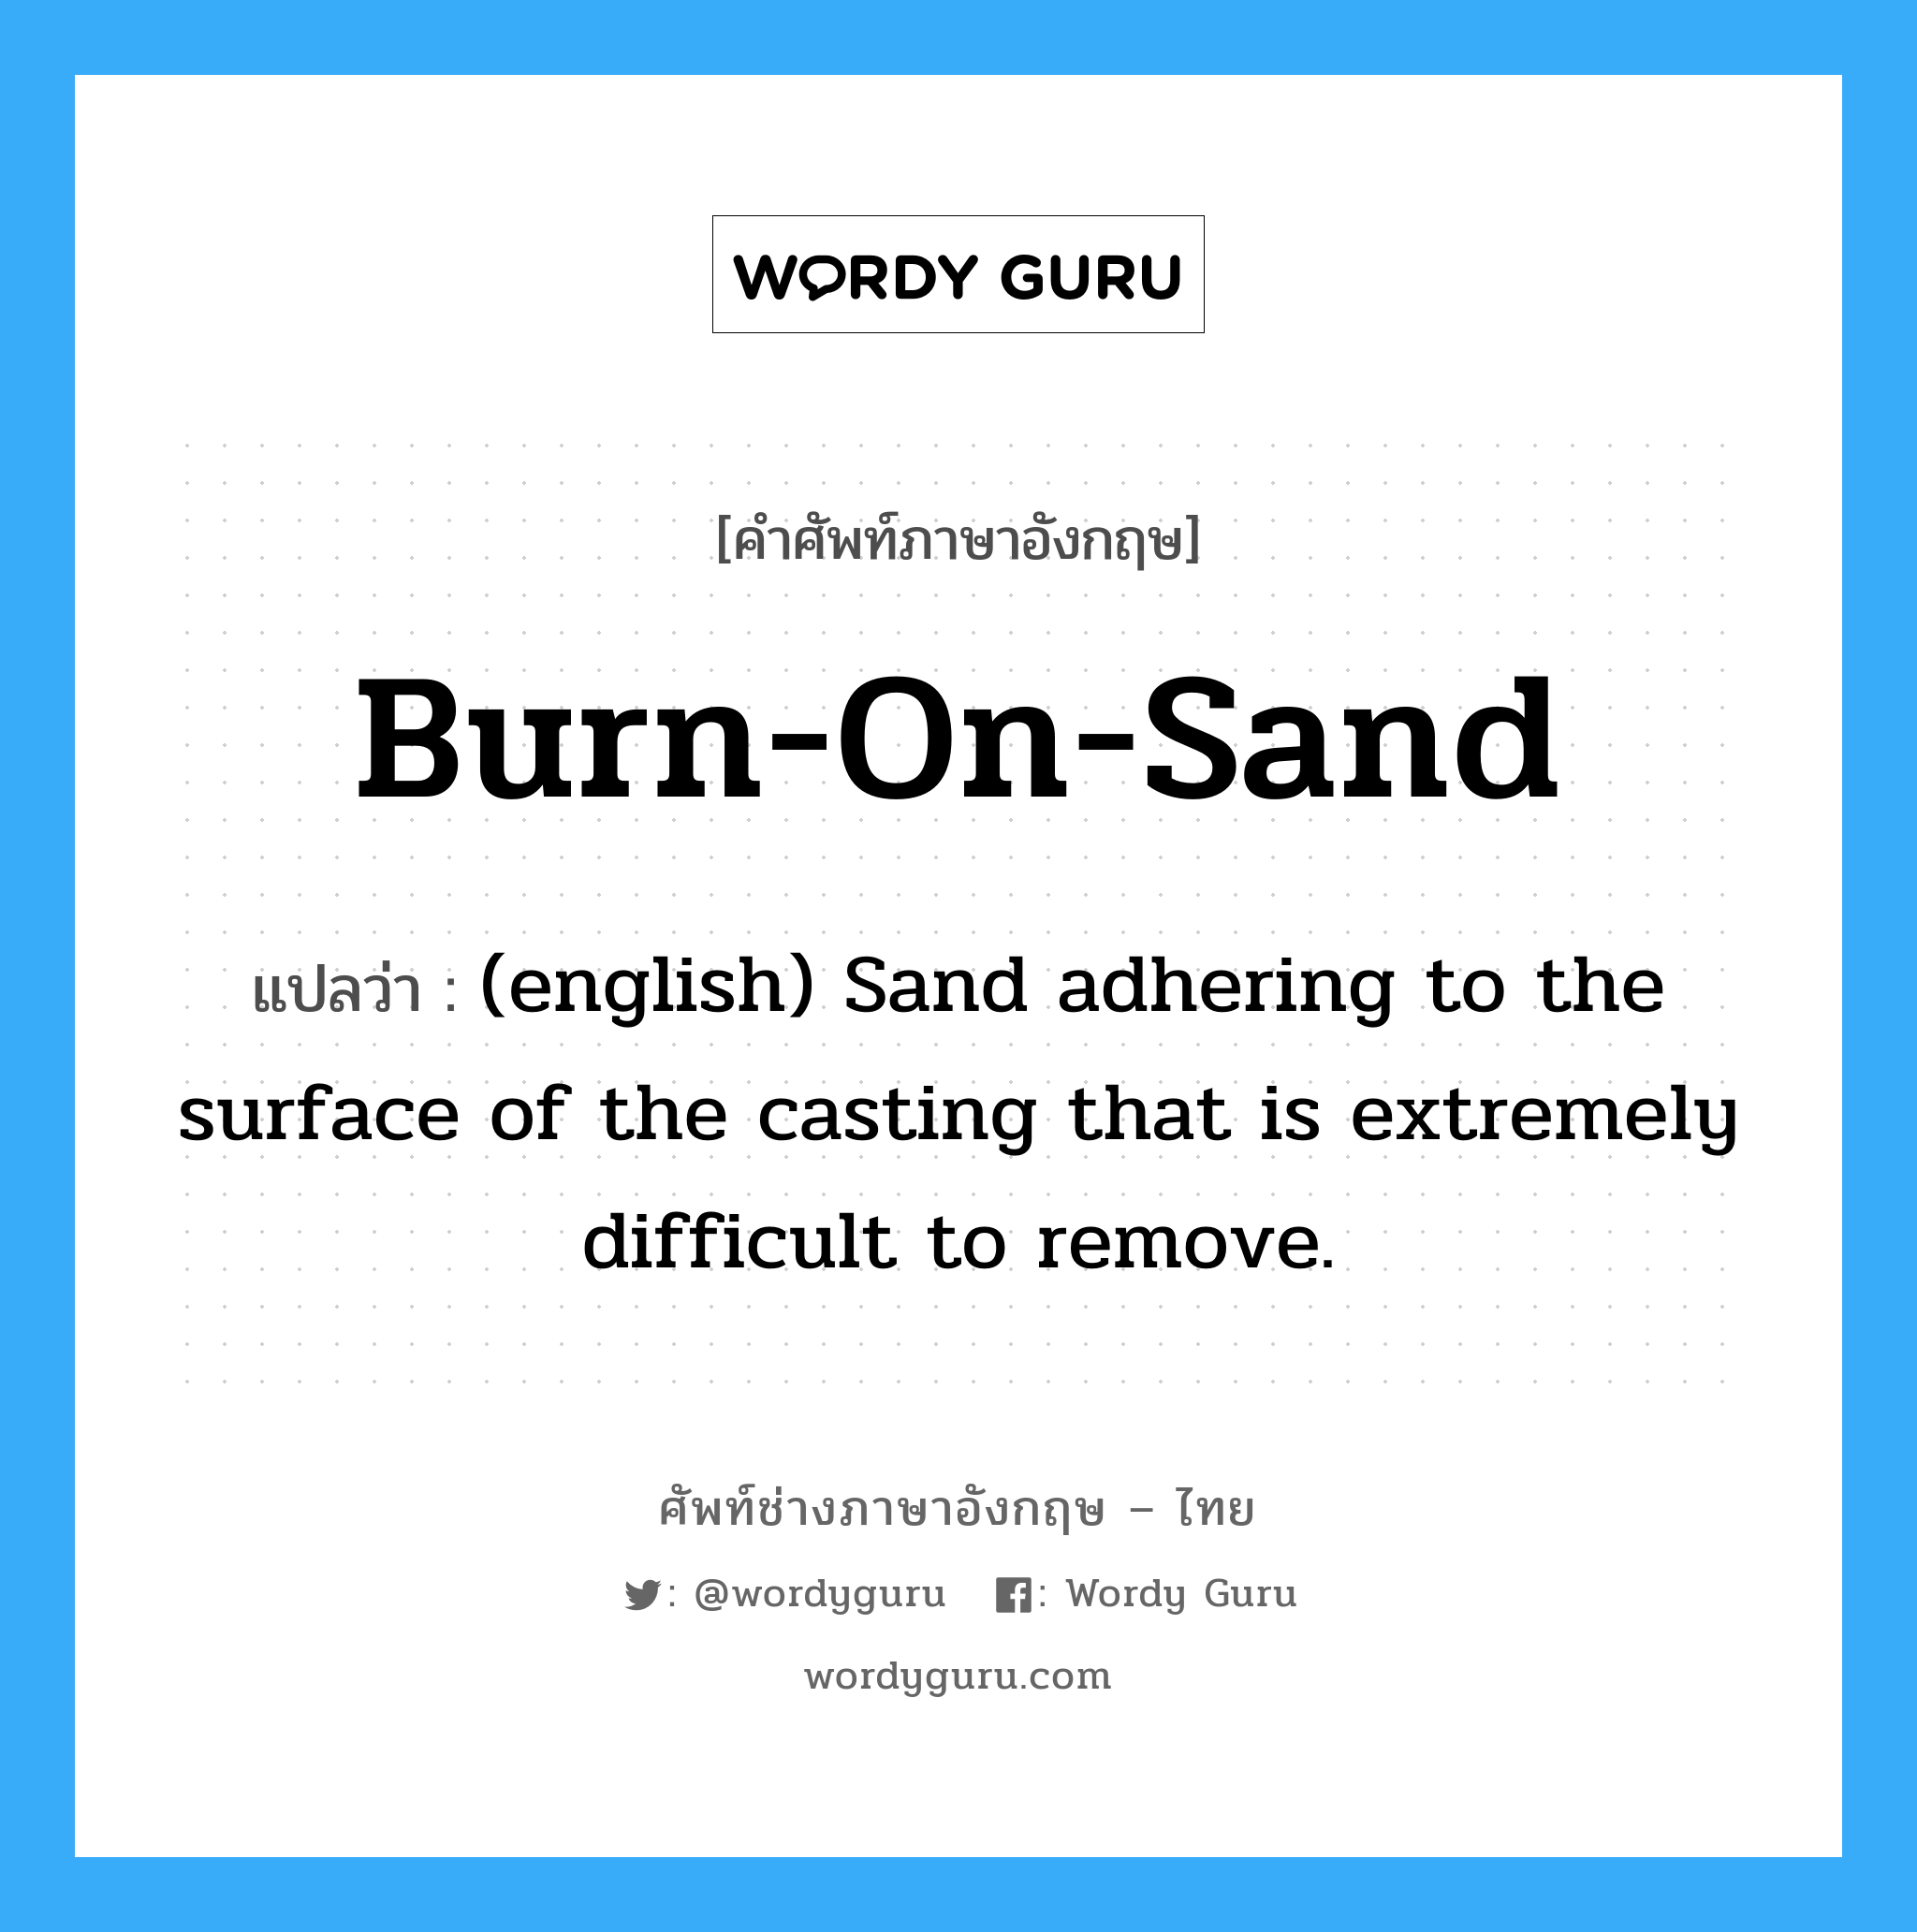 Burn-On-Sand แปลว่า?, คำศัพท์ช่างภาษาอังกฤษ - ไทย Burn-On-Sand คำศัพท์ภาษาอังกฤษ Burn-On-Sand แปลว่า (english) Sand adhering to the surface of the casting that is extremely difficult to remove.